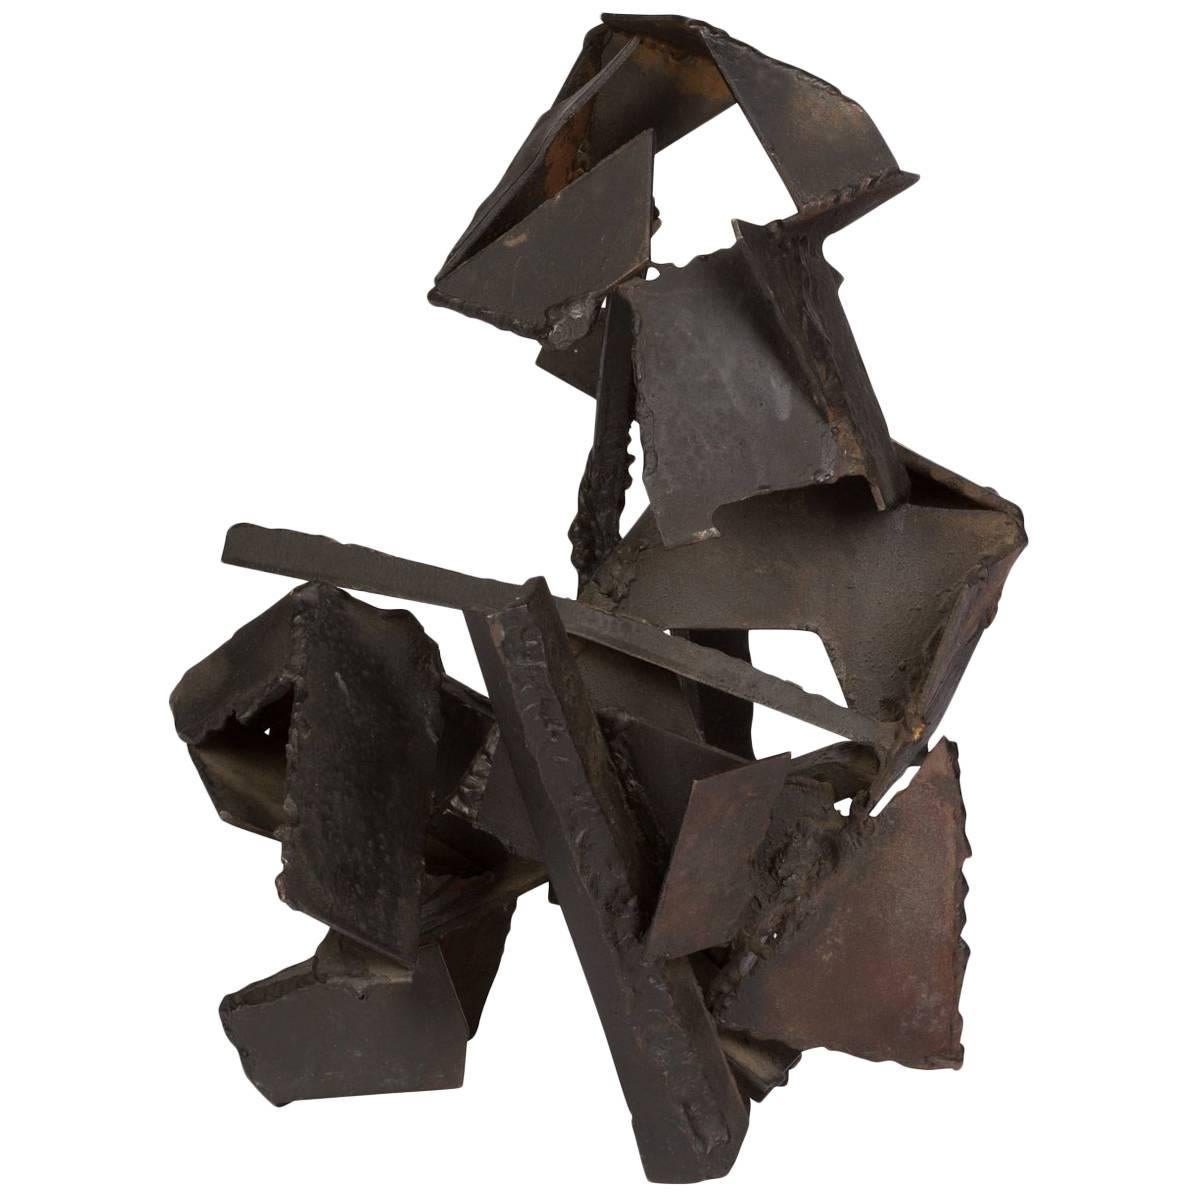 Brutalist Style Abstract Metal Sculpture